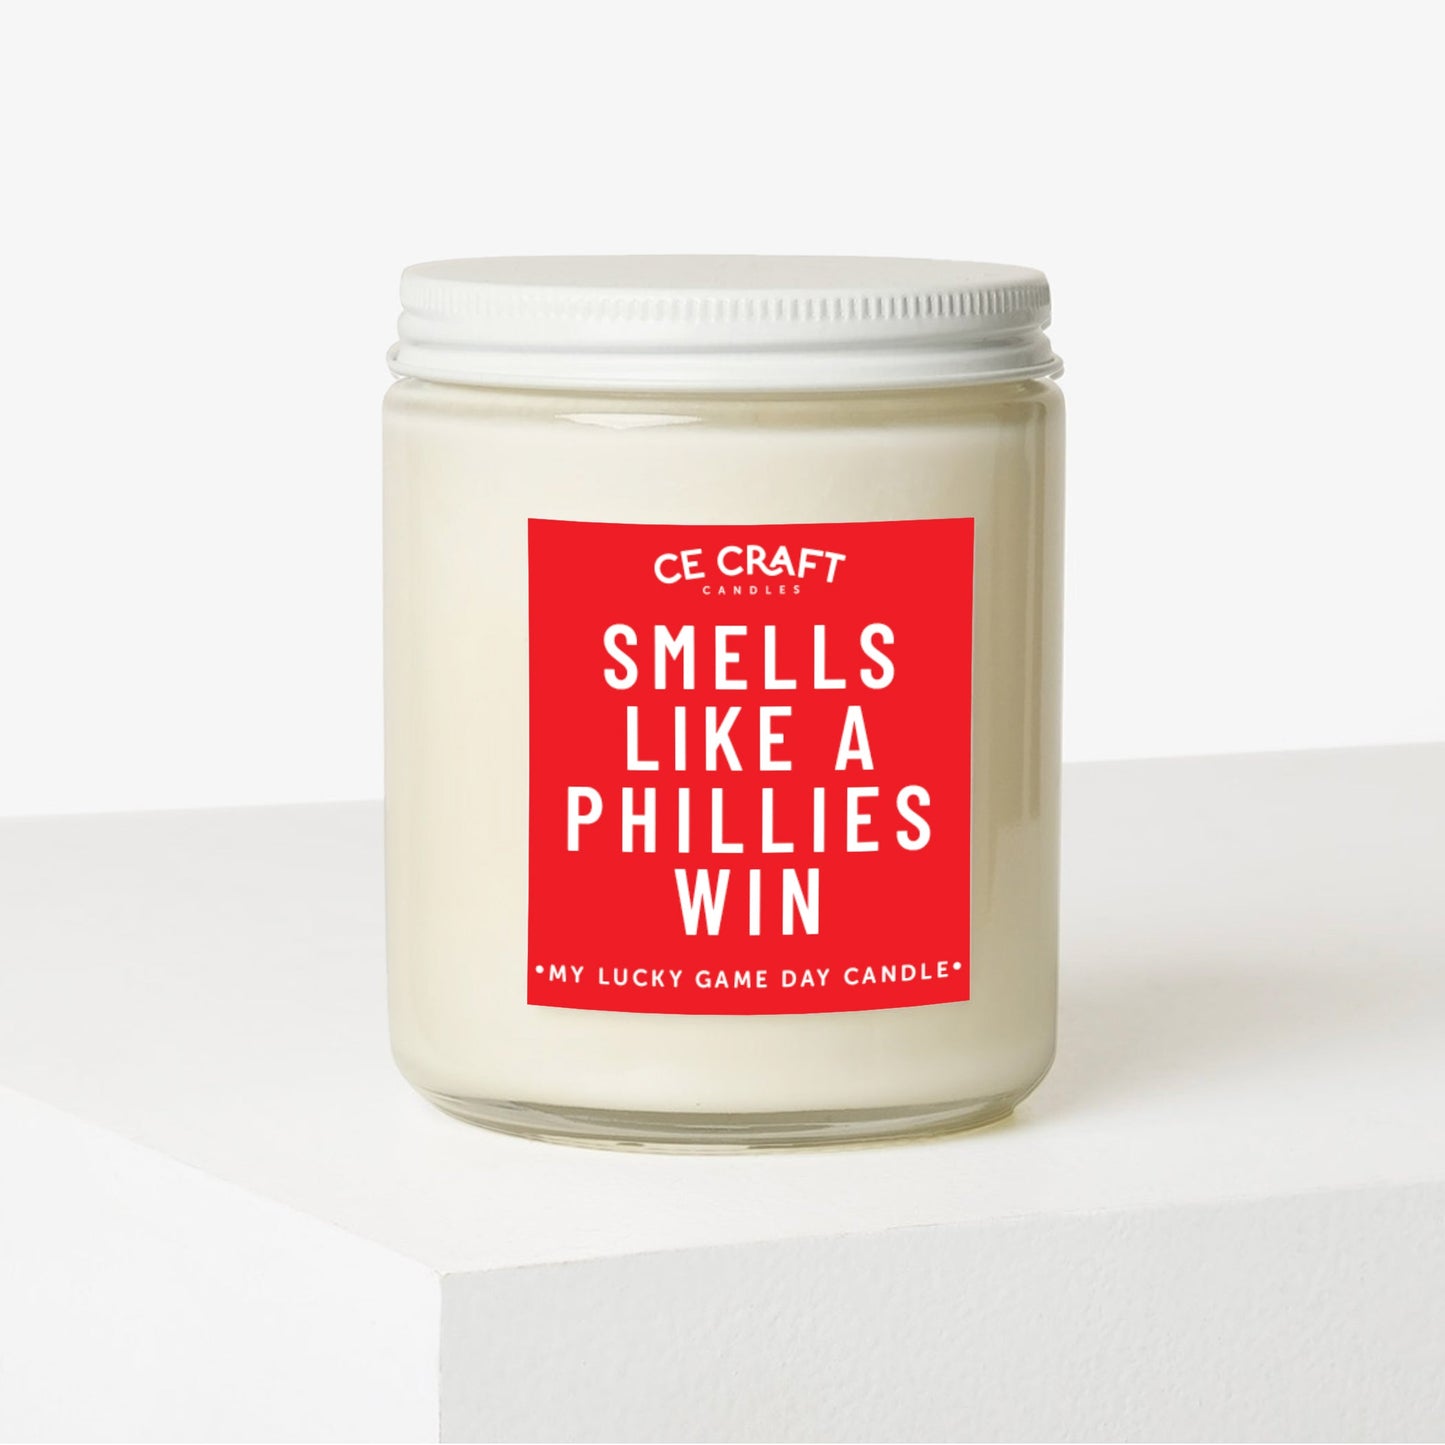 Smells Like a Phillies Win Scented Candle Candles CE Craft 